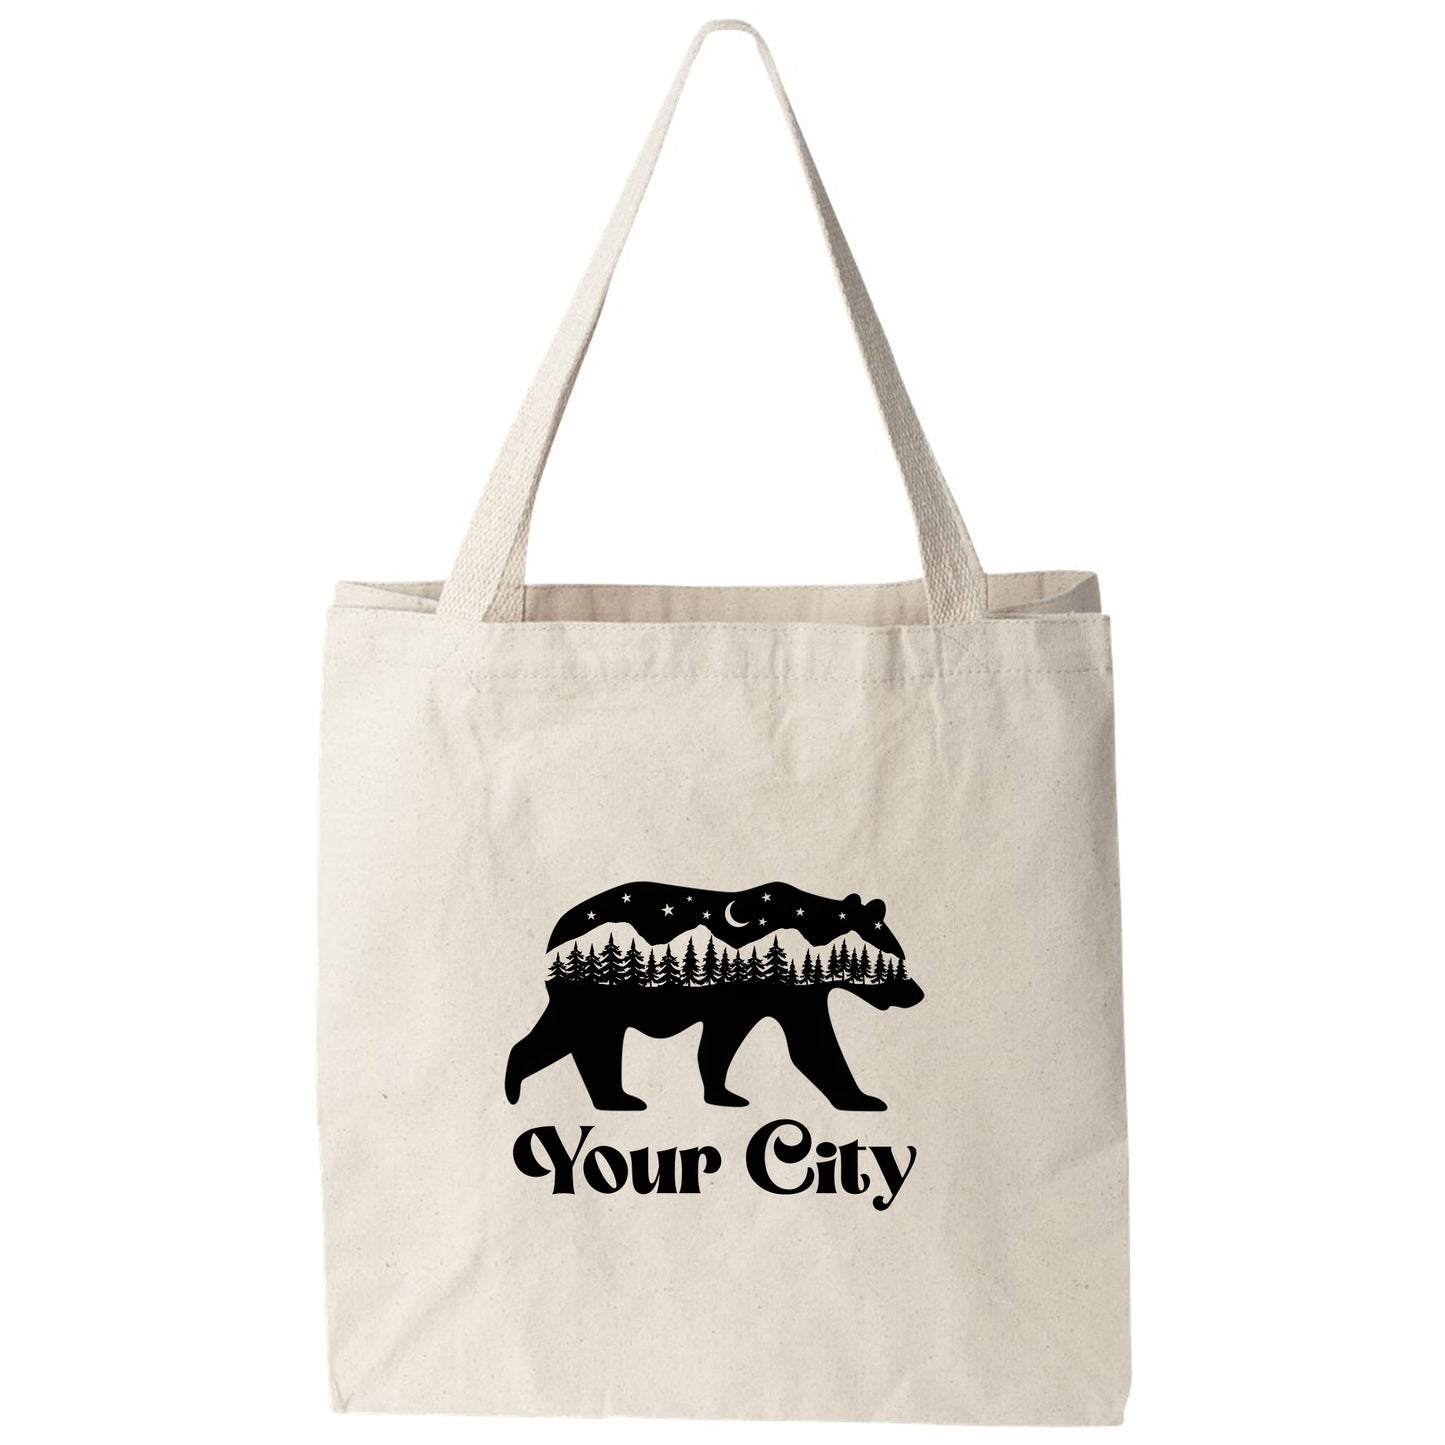 a tote bag with a bear on it